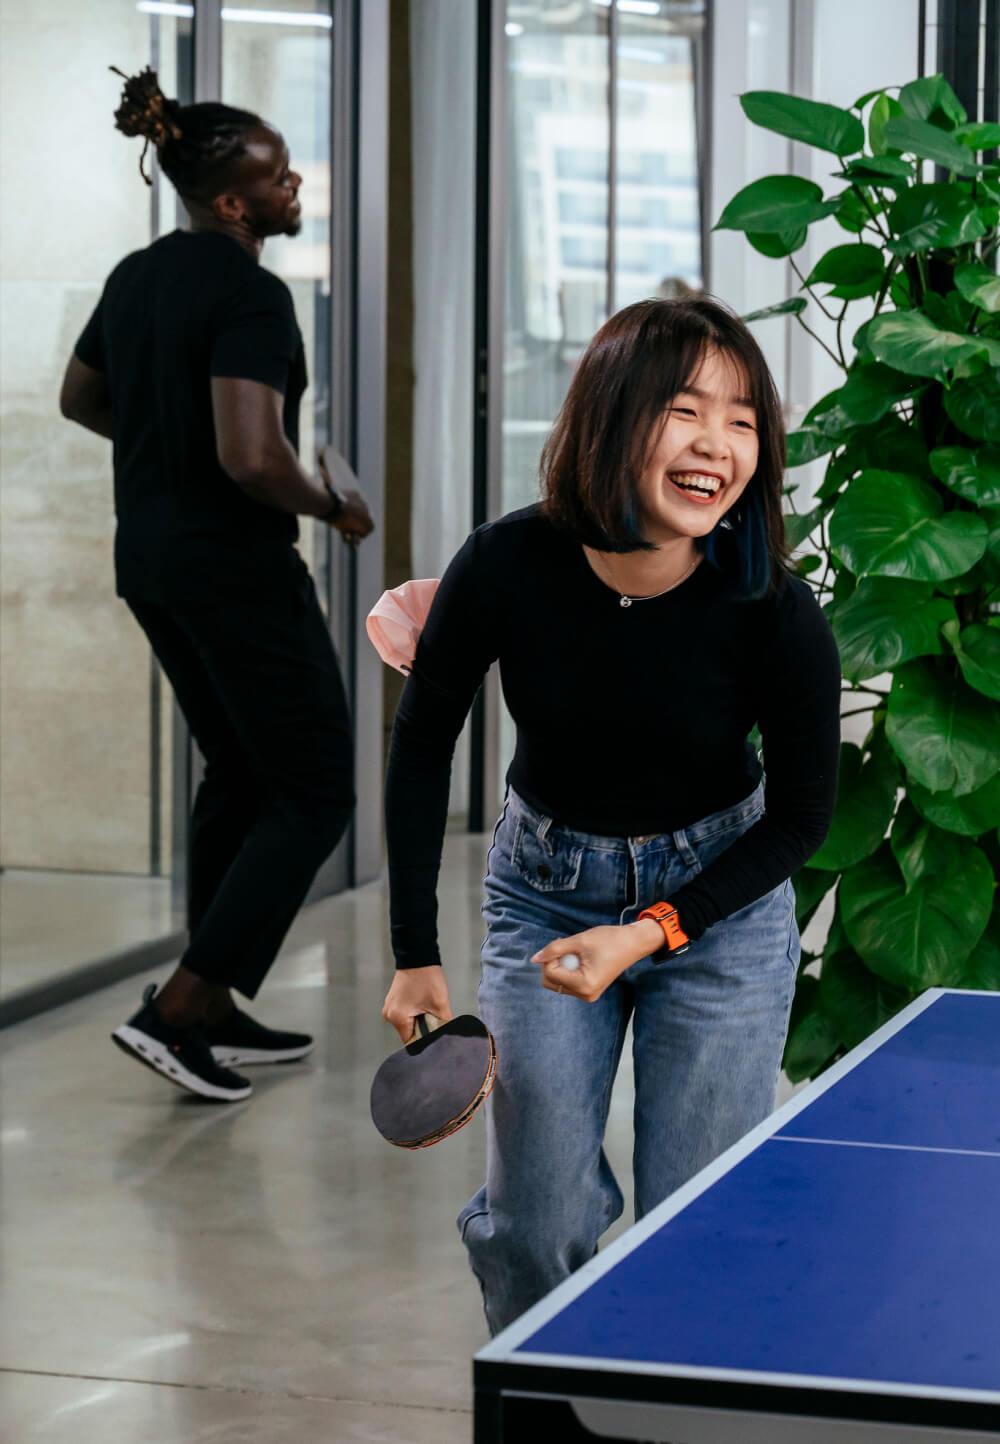 woman smiling playing table tennis